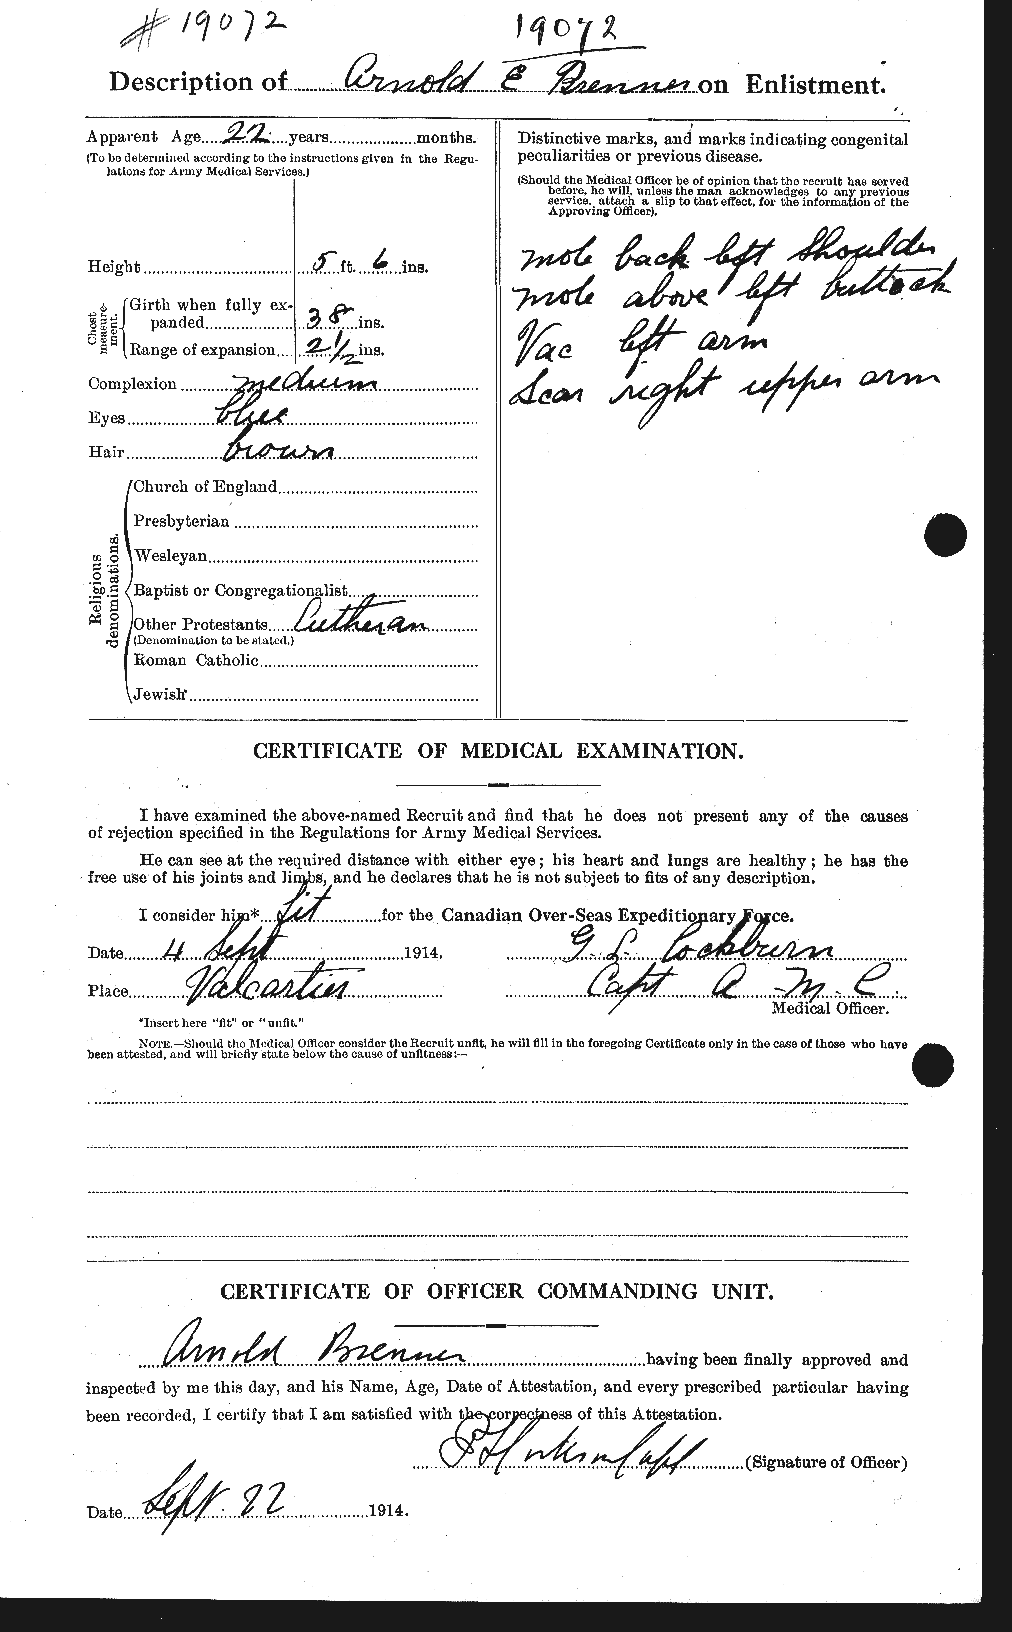 Personnel Records of the First World War - CEF 260225b